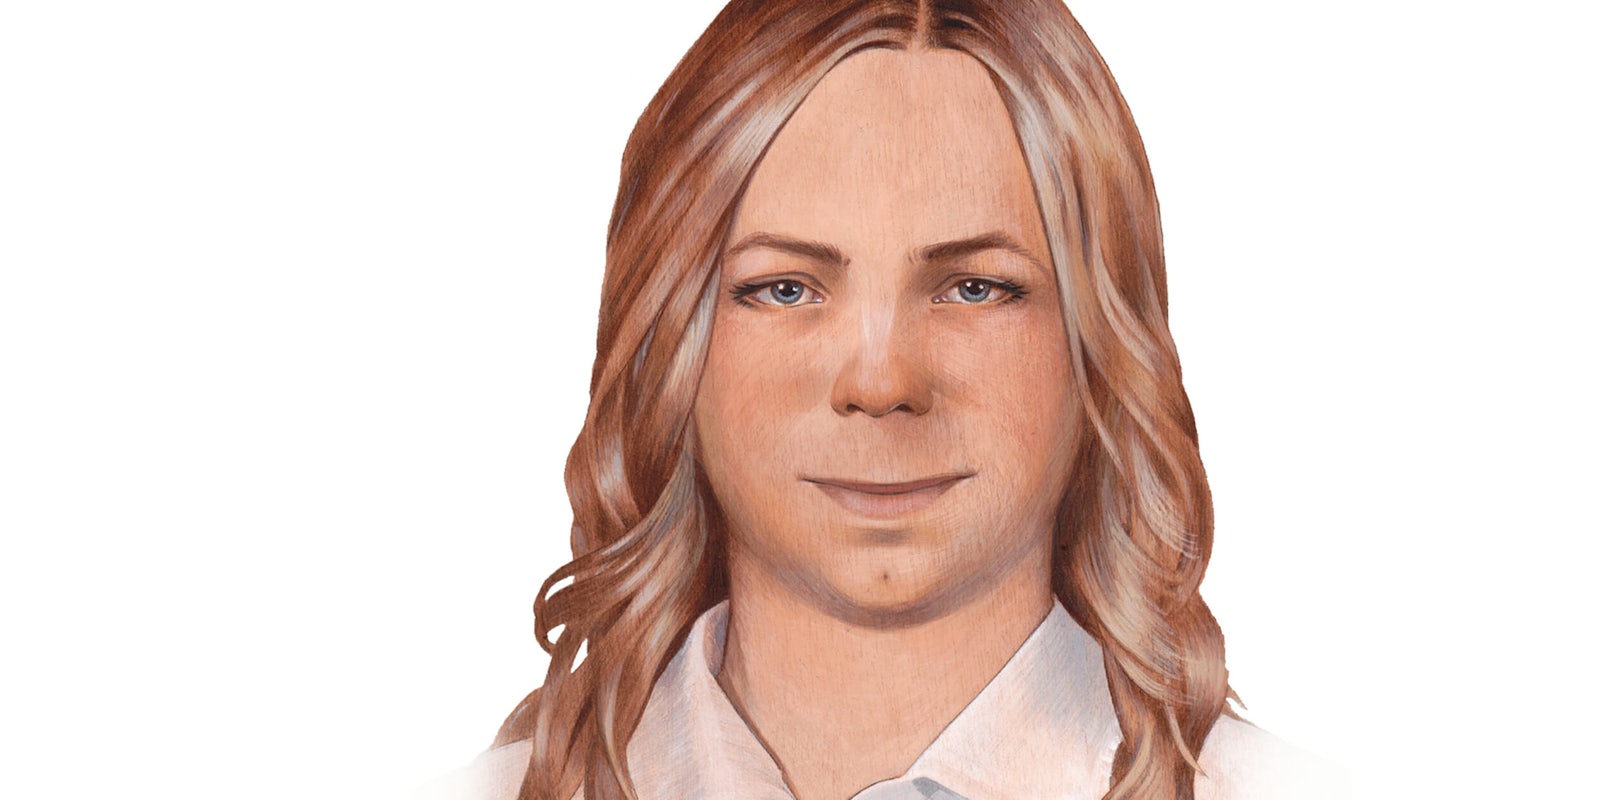 'How Chelsea Manning sees herself' painting